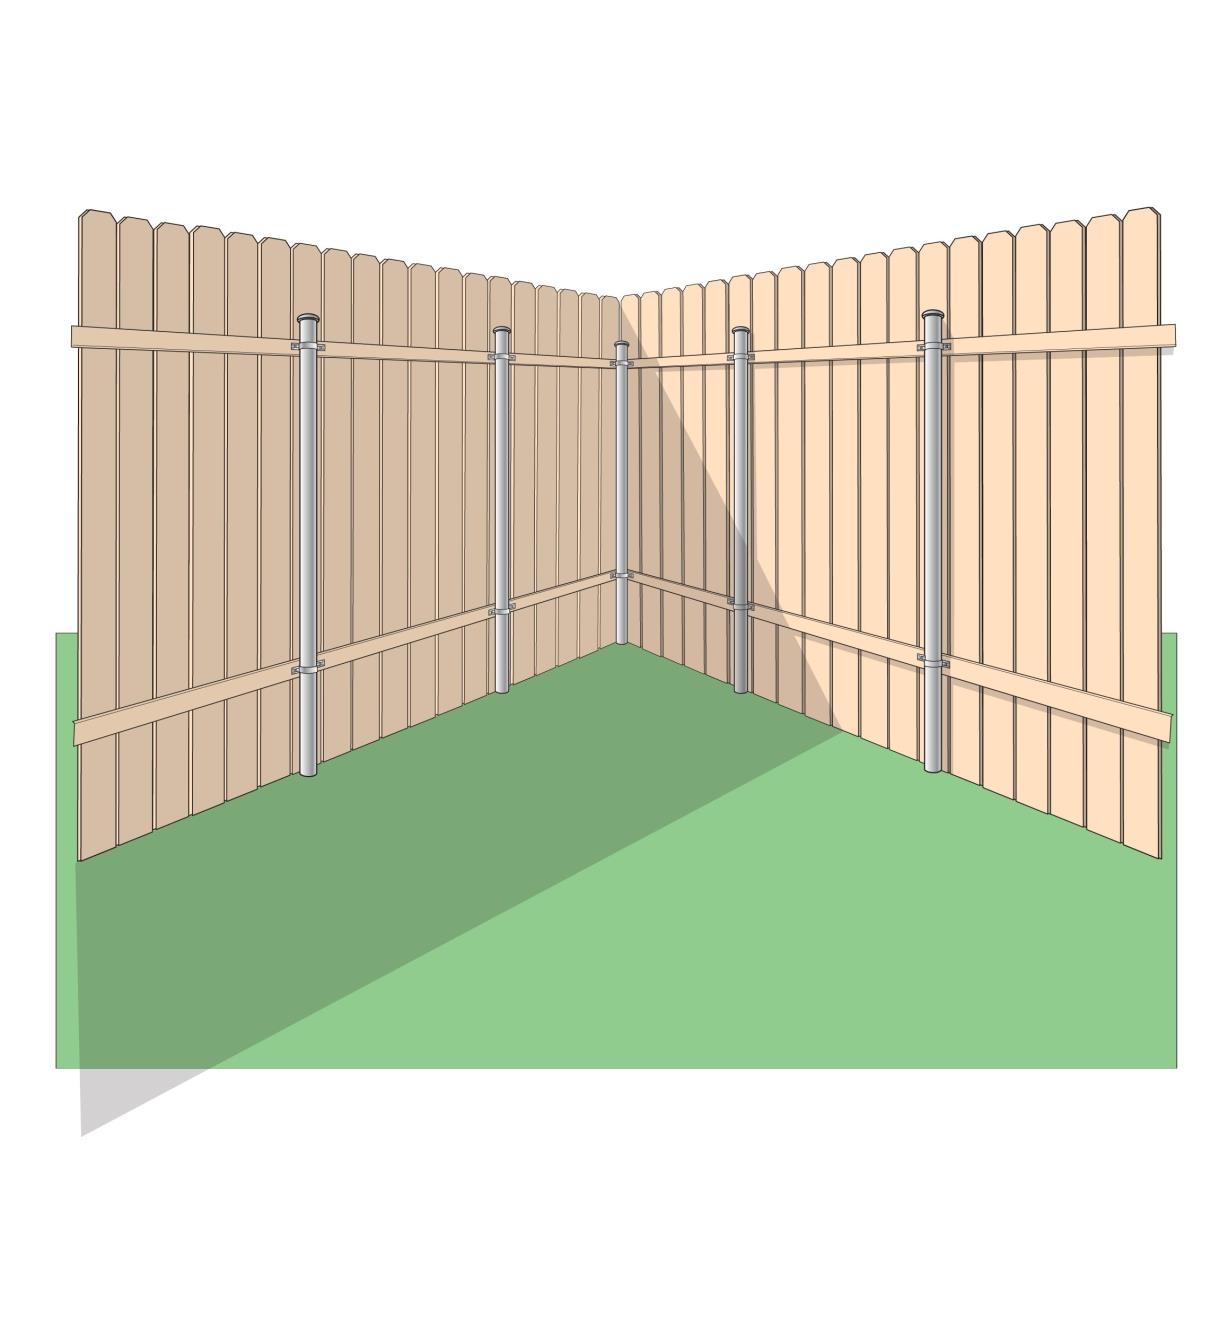 Illustration of steel posts secured to a wooden fence using Ozco brackets